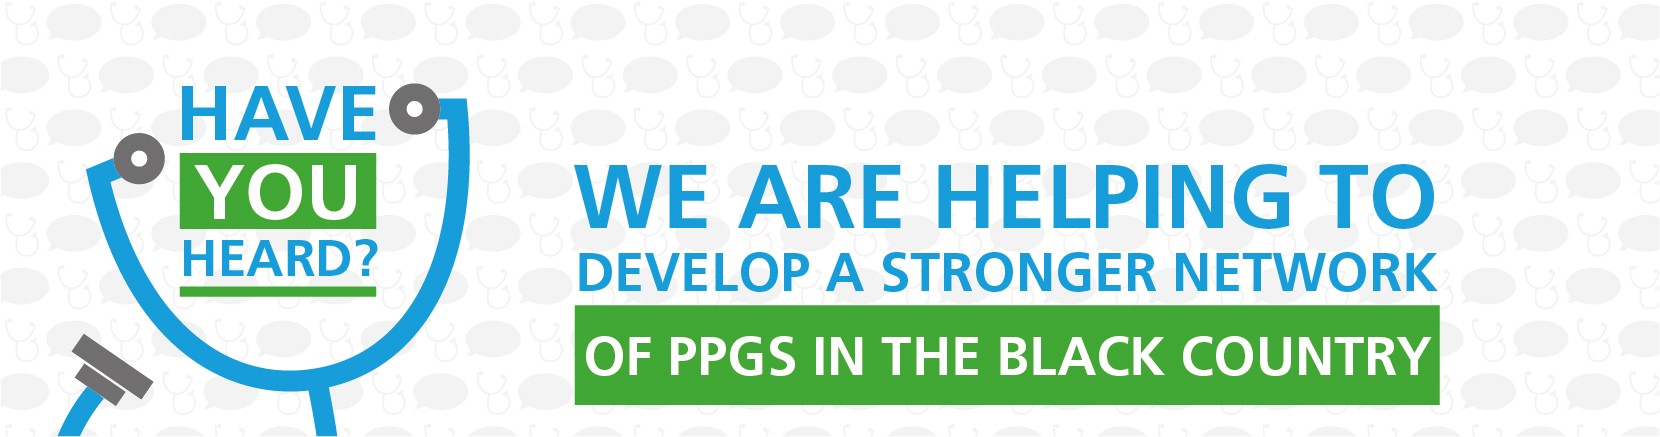 Have you heard? We are helping to develop a stronger network of PPGs in the Black Country.